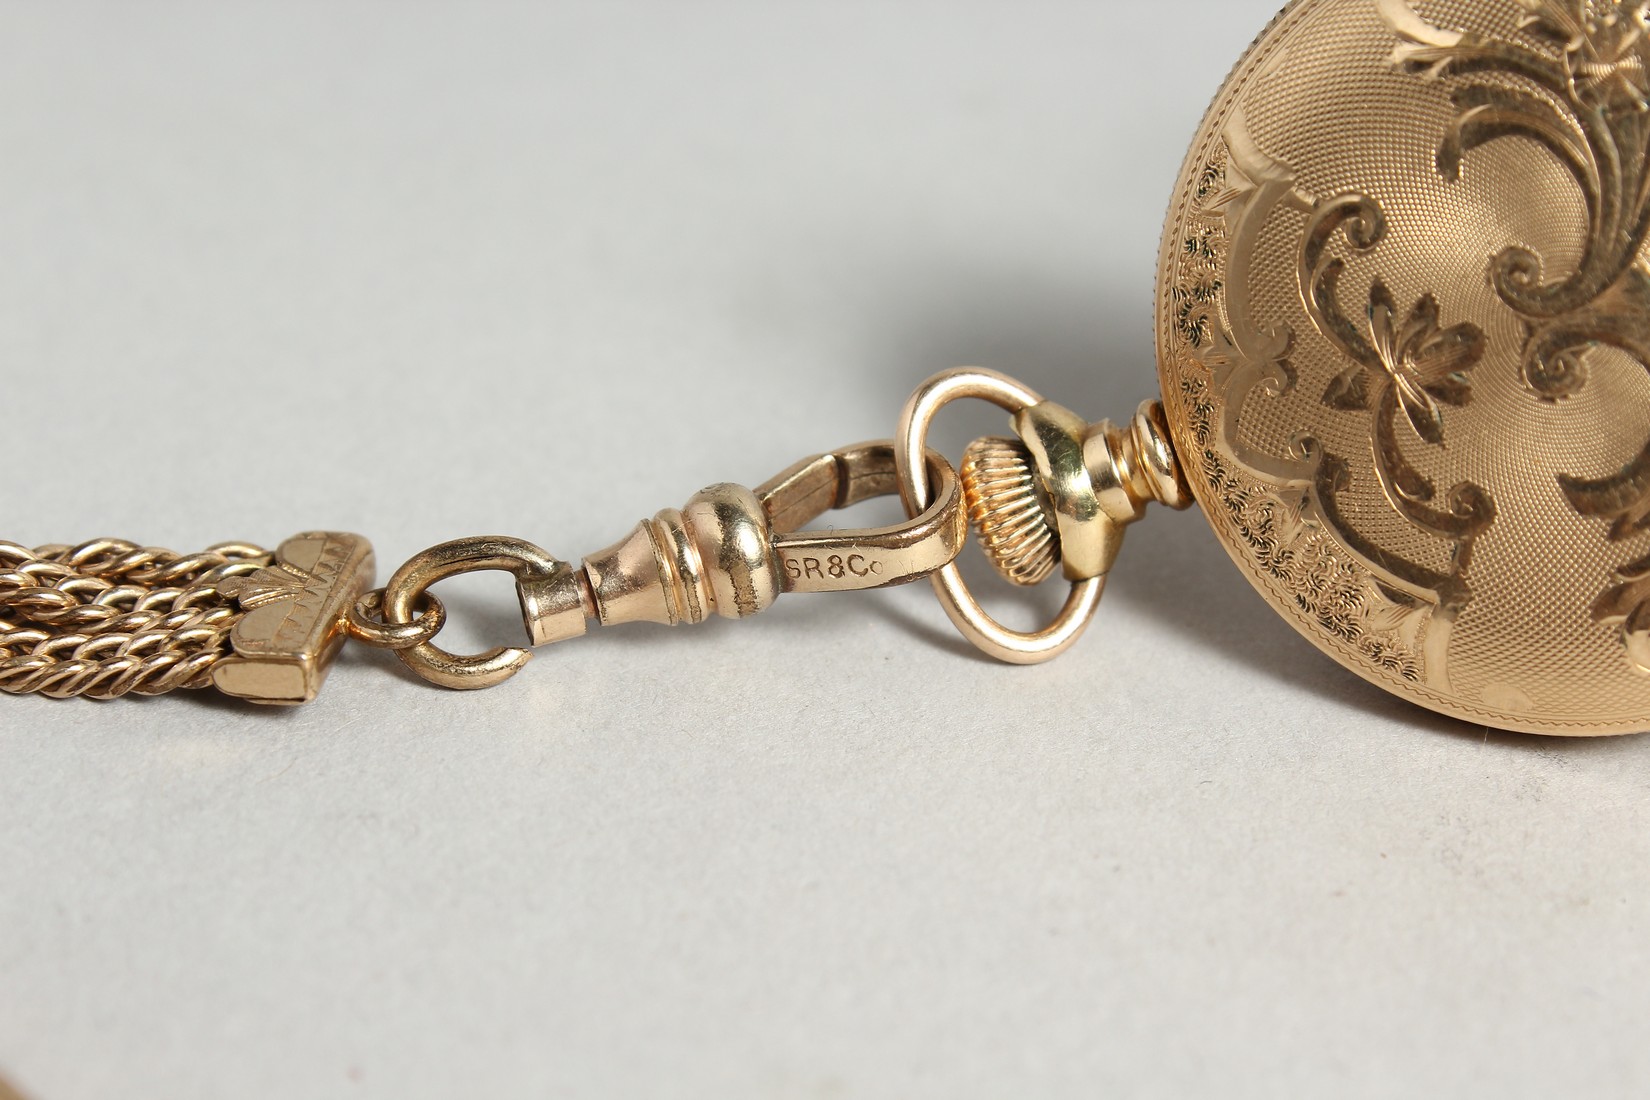 A LADIES WALTHAM DRESS WATCH AND CHAIN - Image 8 of 10